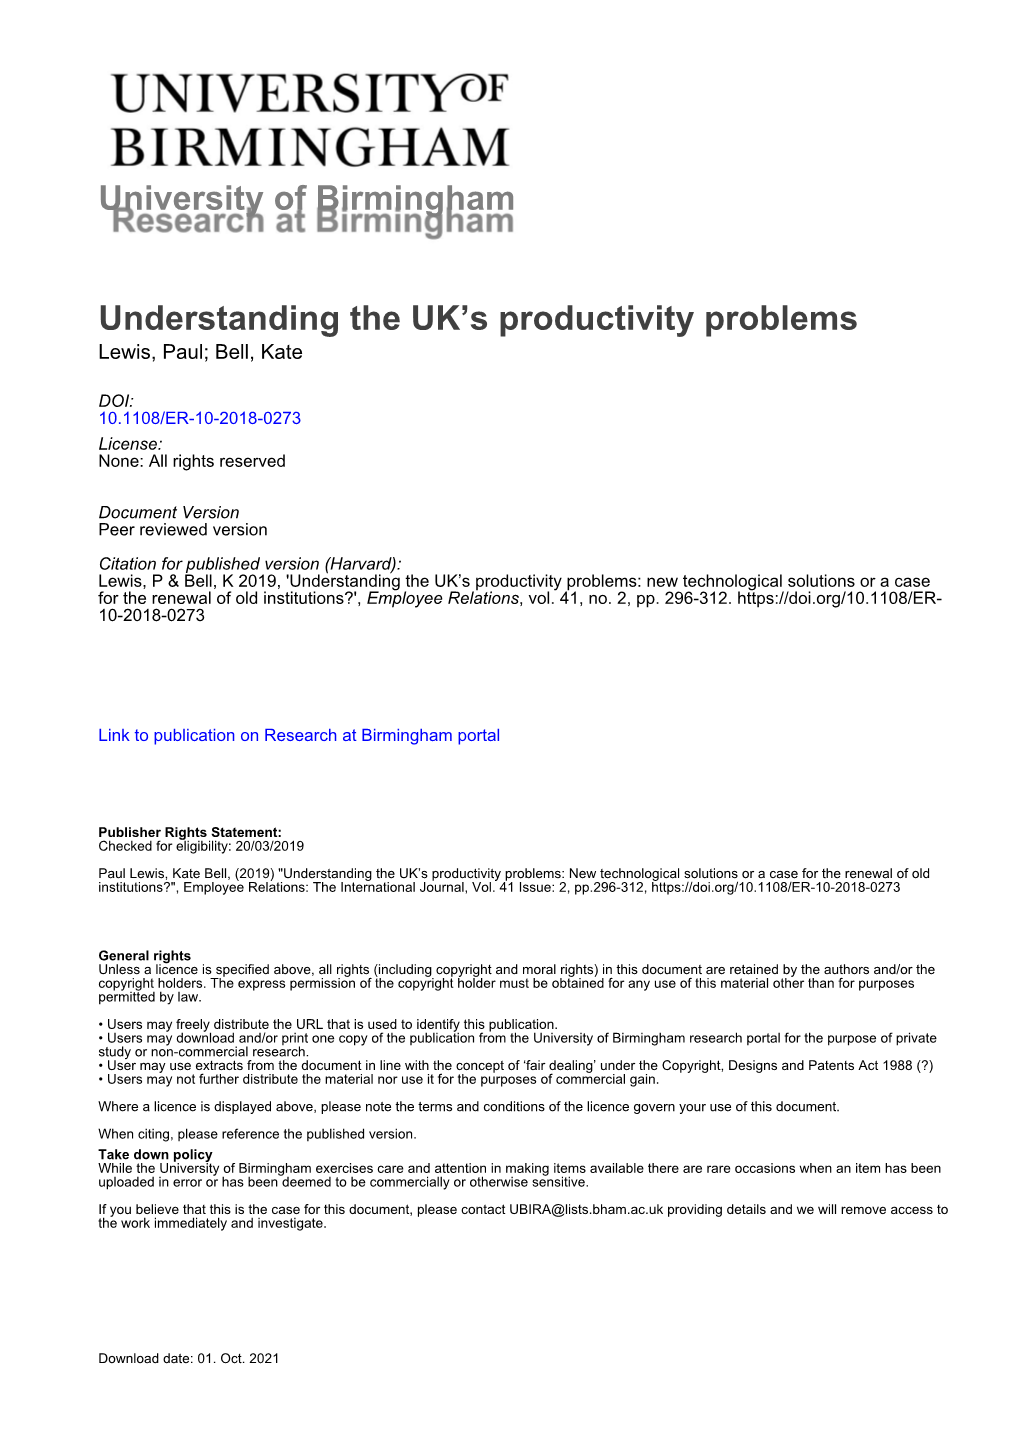 Understanding the UK's Productivity Problems: New Technological Solutions Or a Case for the Renewal of Old Institutions?